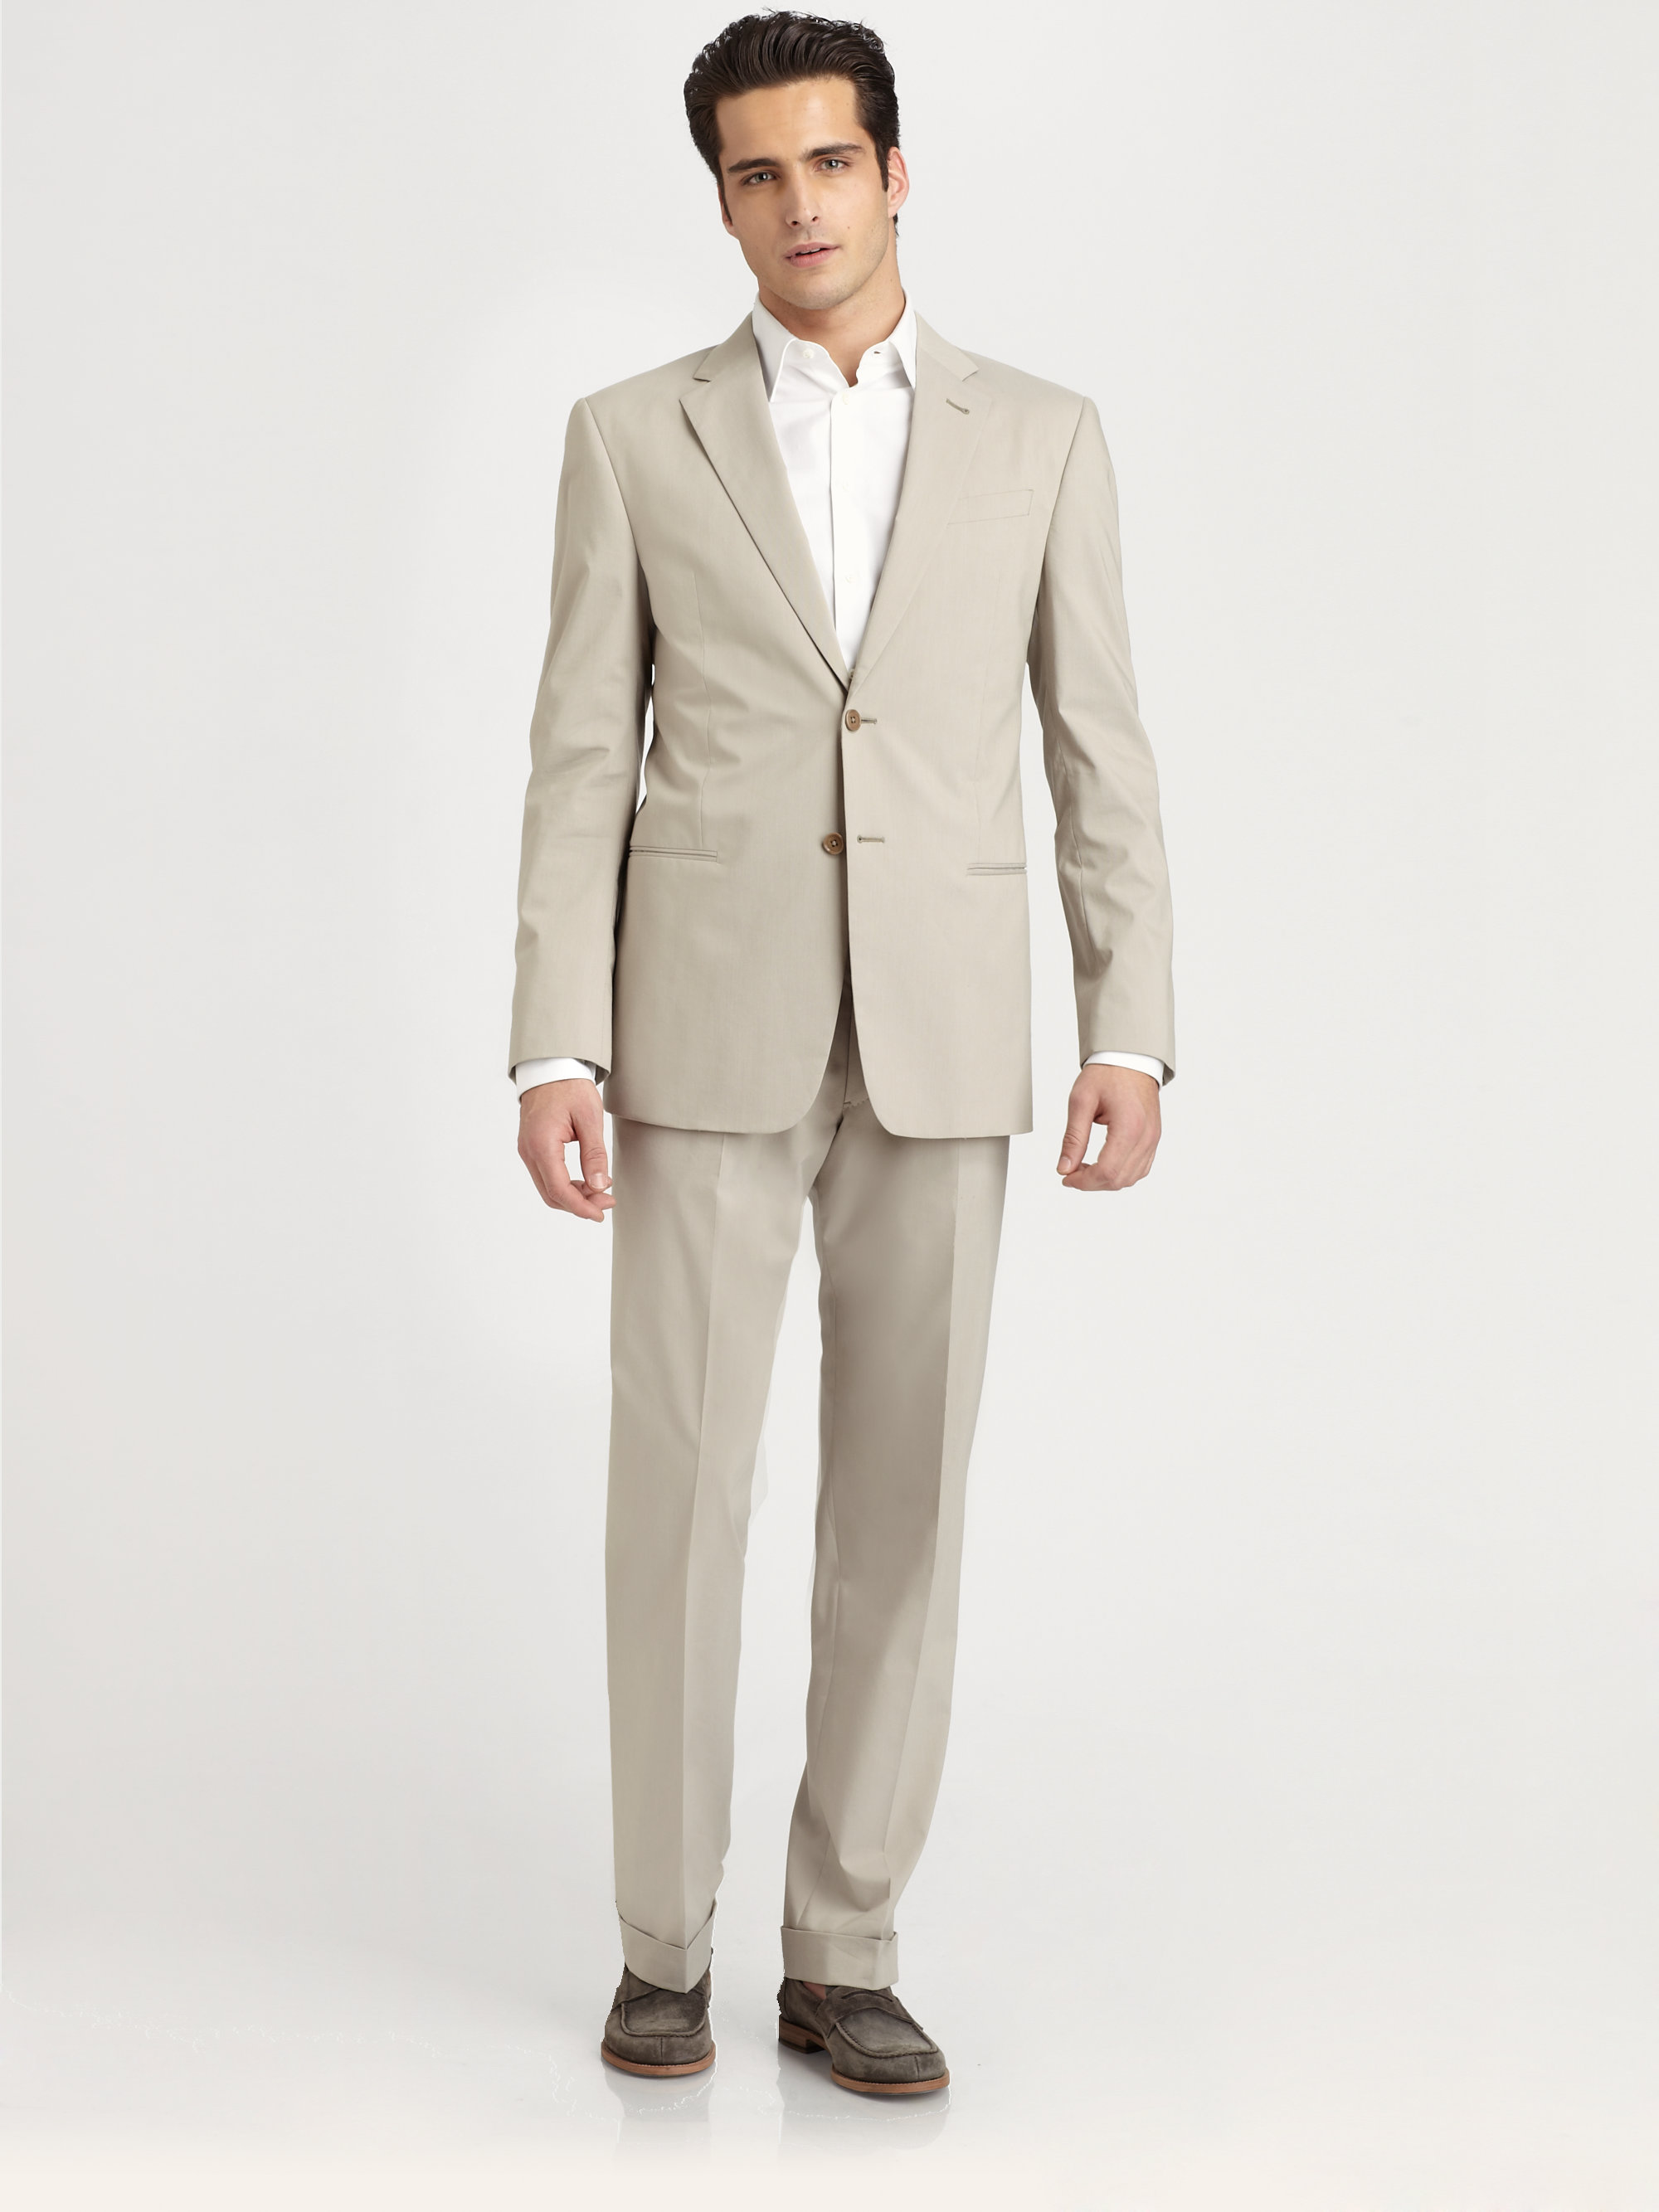 Armani Cotton Summer Suit in Soft Tan 